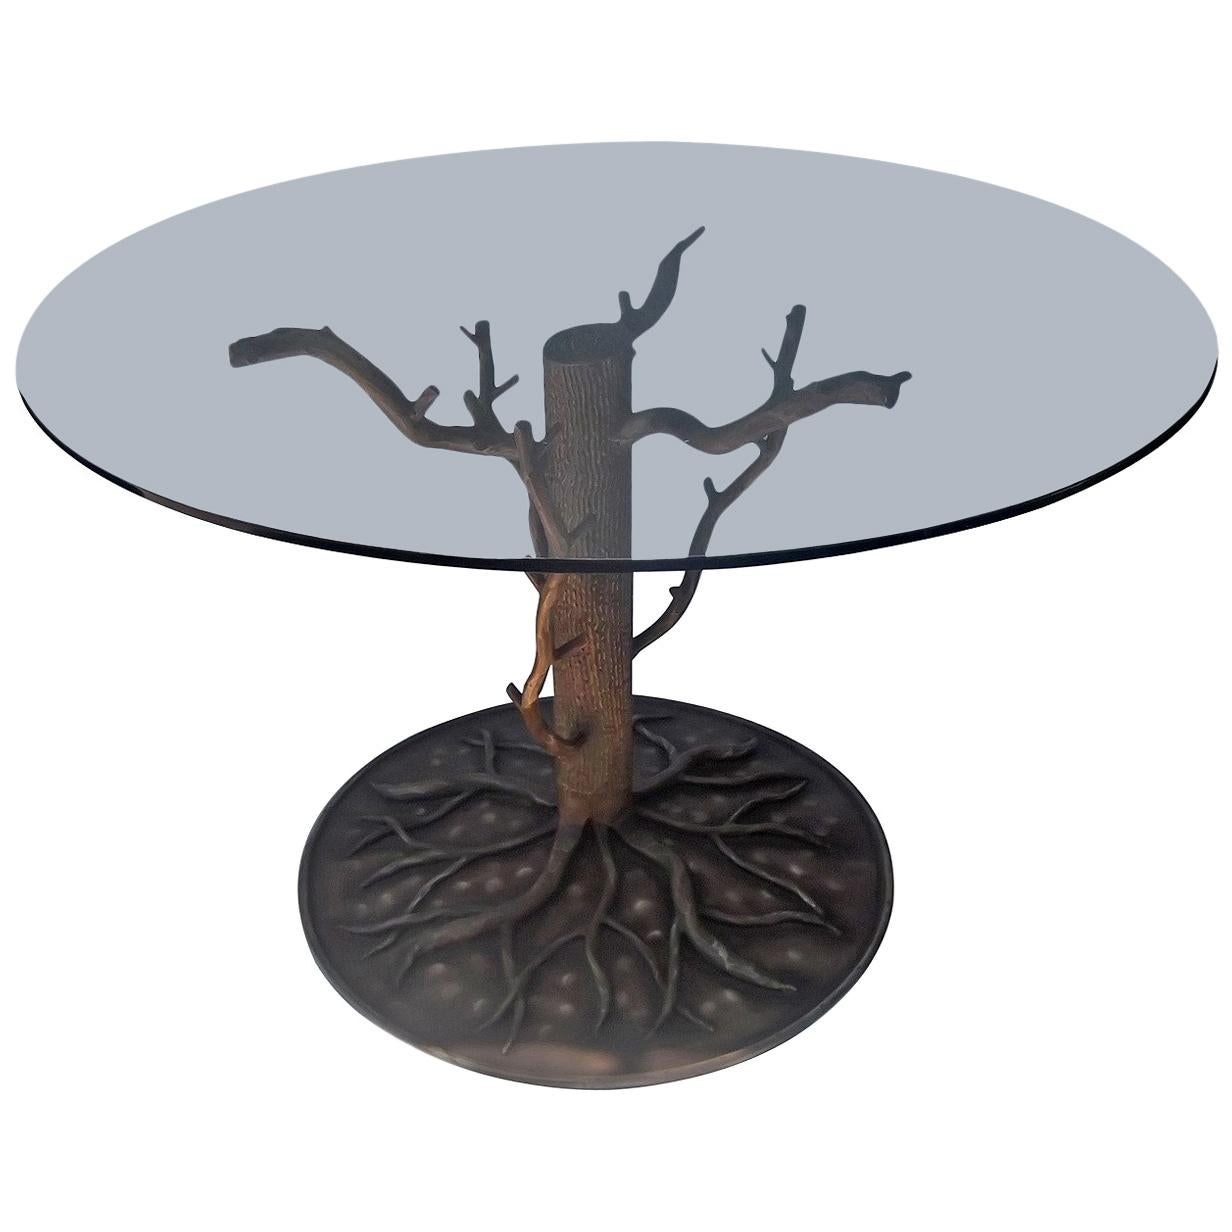 Painted Steel "Tree and Branch" Center Dining Table